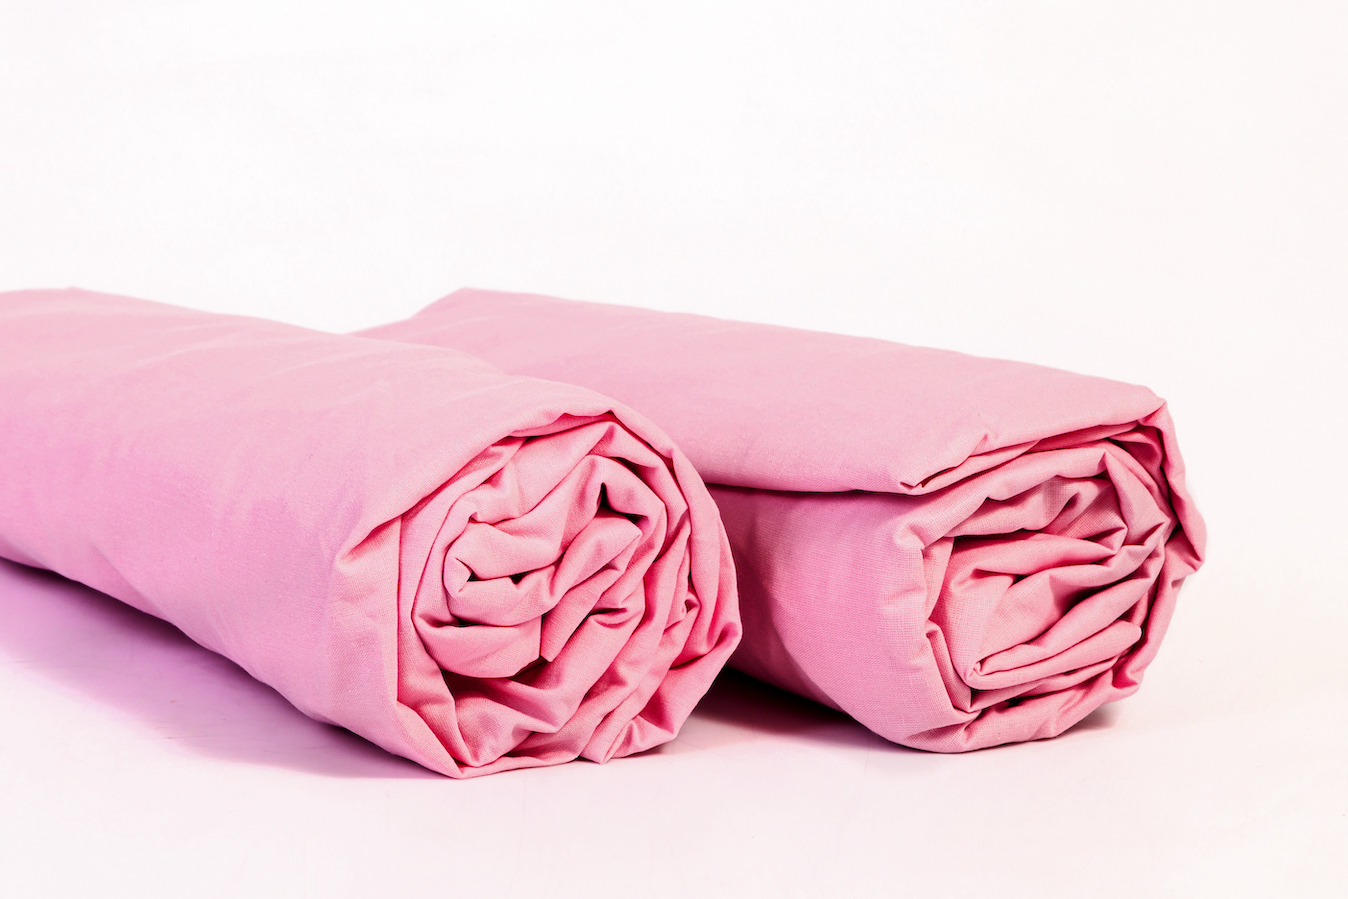 Pink fitted sheets an how to fold them into log rolls